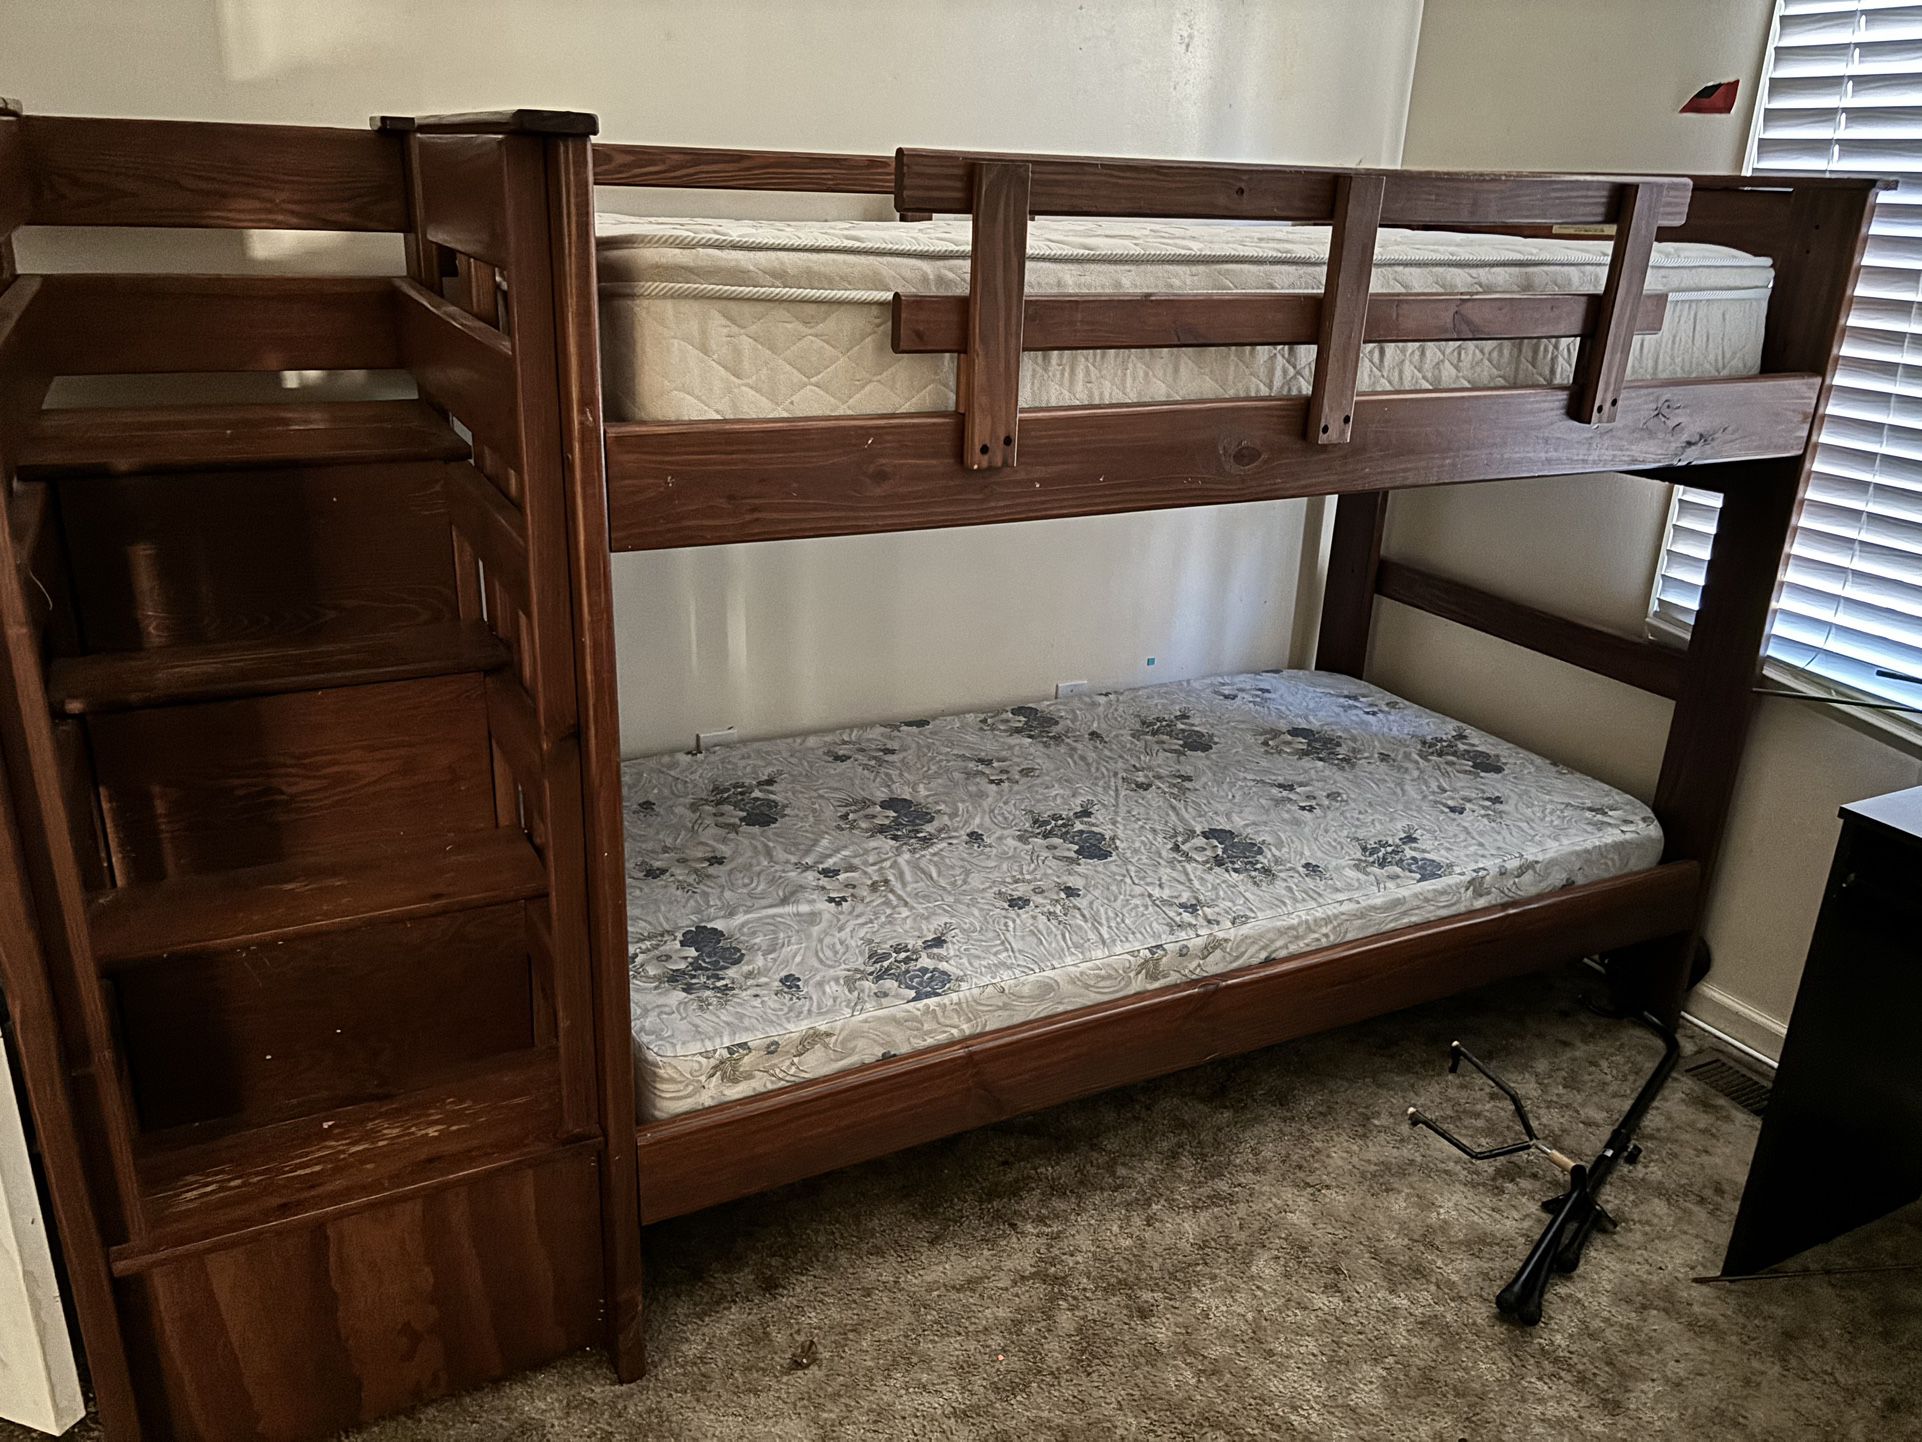 Bunk Bed With Ladder